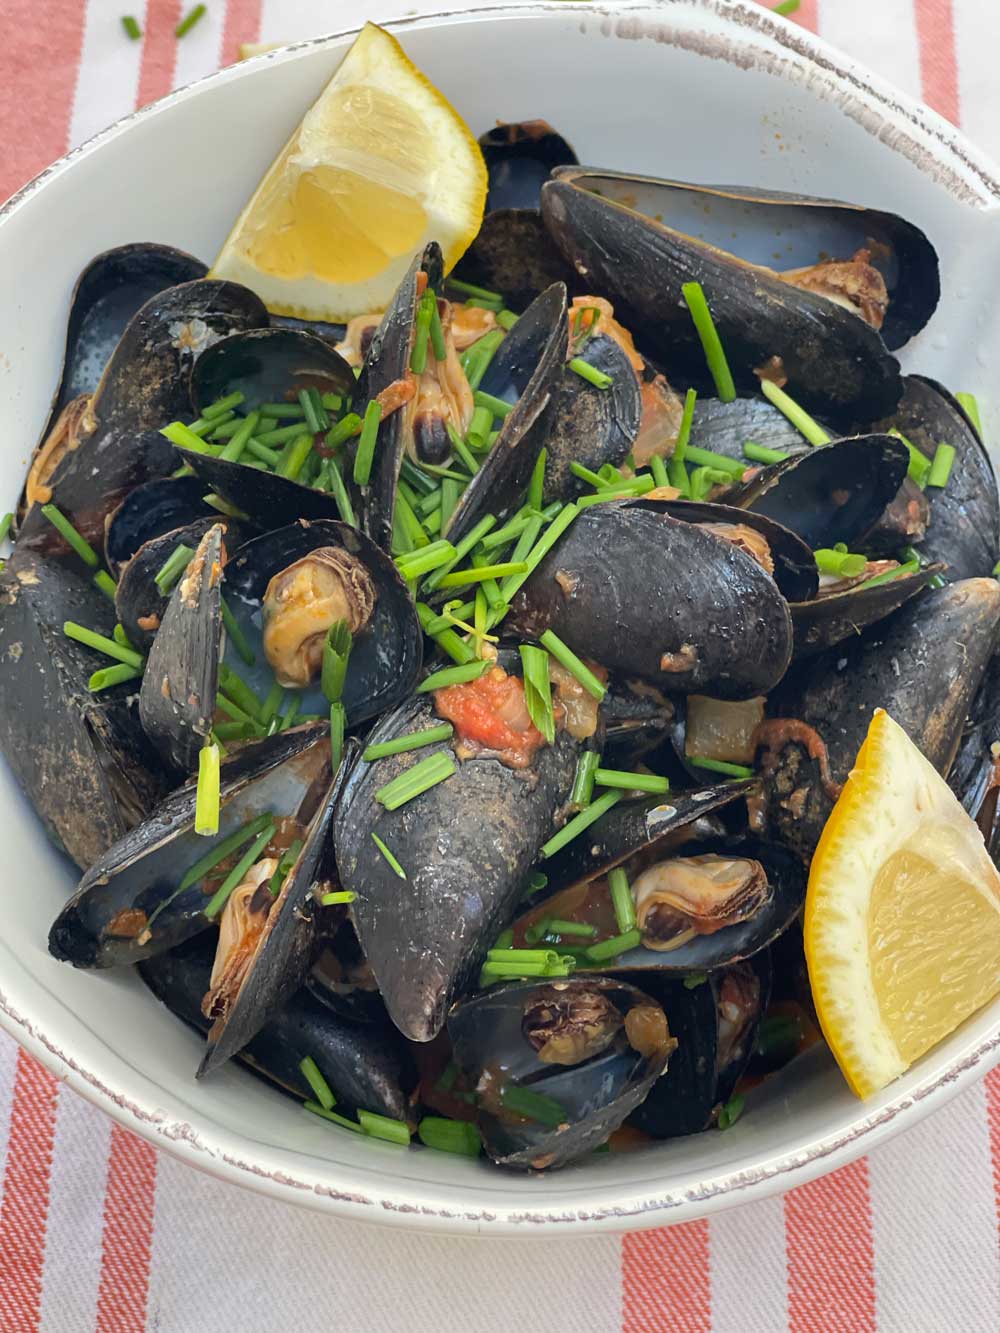 3 Ingredient Mussels recipe with a saucy Amatriciana. Easy summer seafood recipe! Happy Cooking! www.Chophappy.com #mussels #summerrecipe 